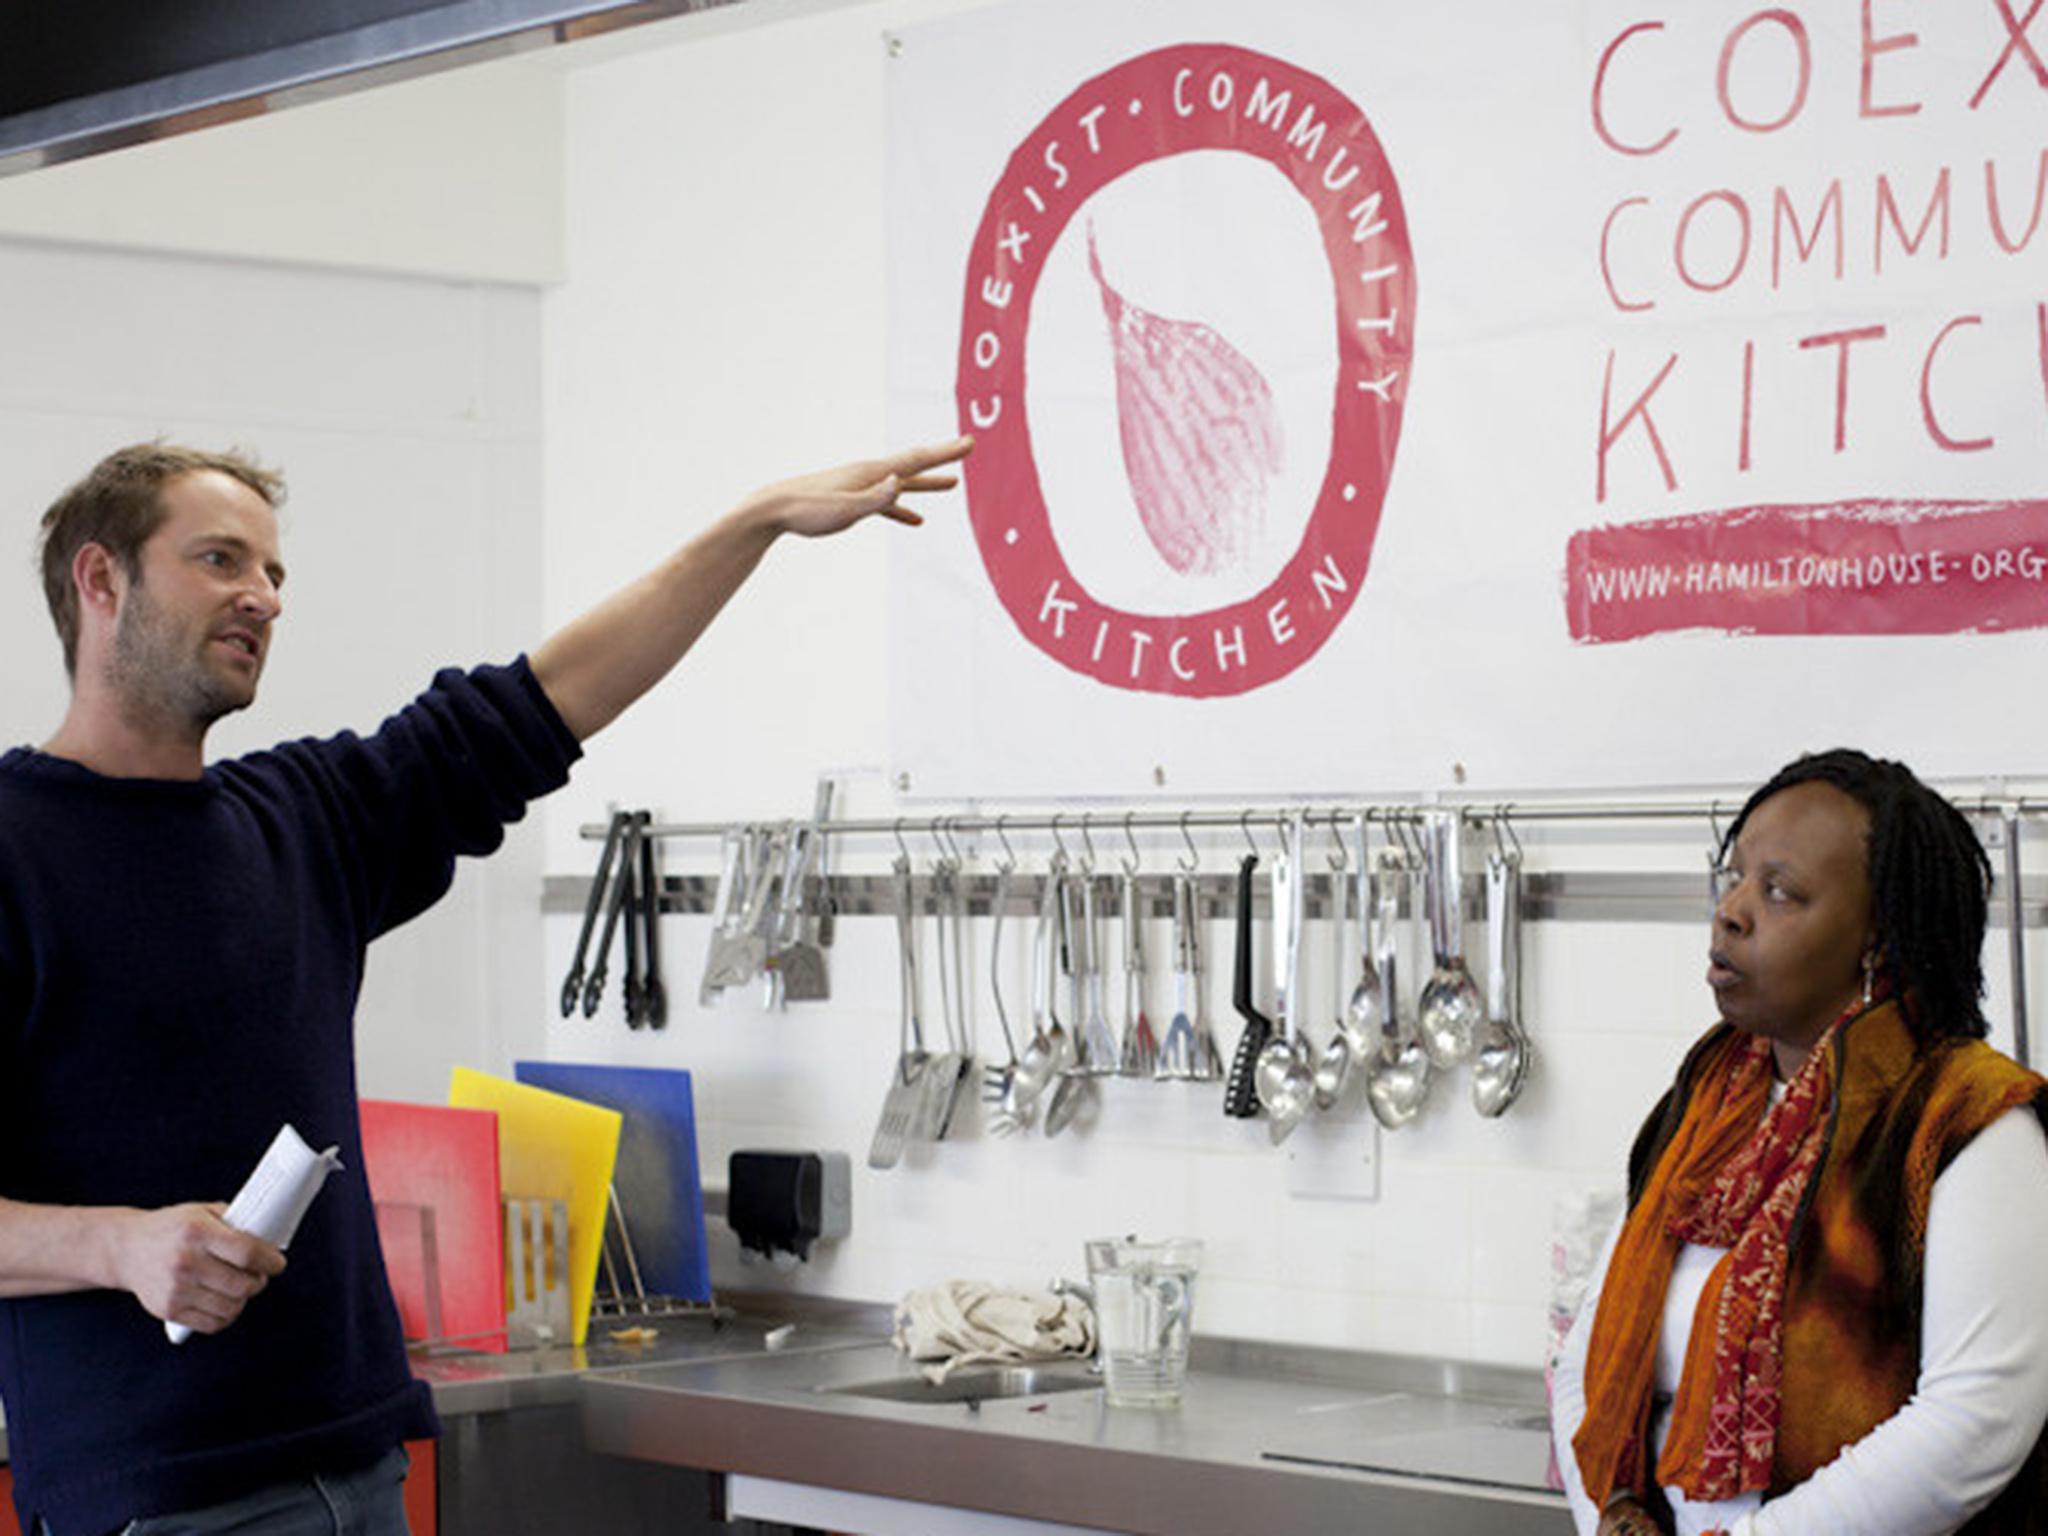 Coexist employs disadvantaged people and trains them to work in the hospitality sector